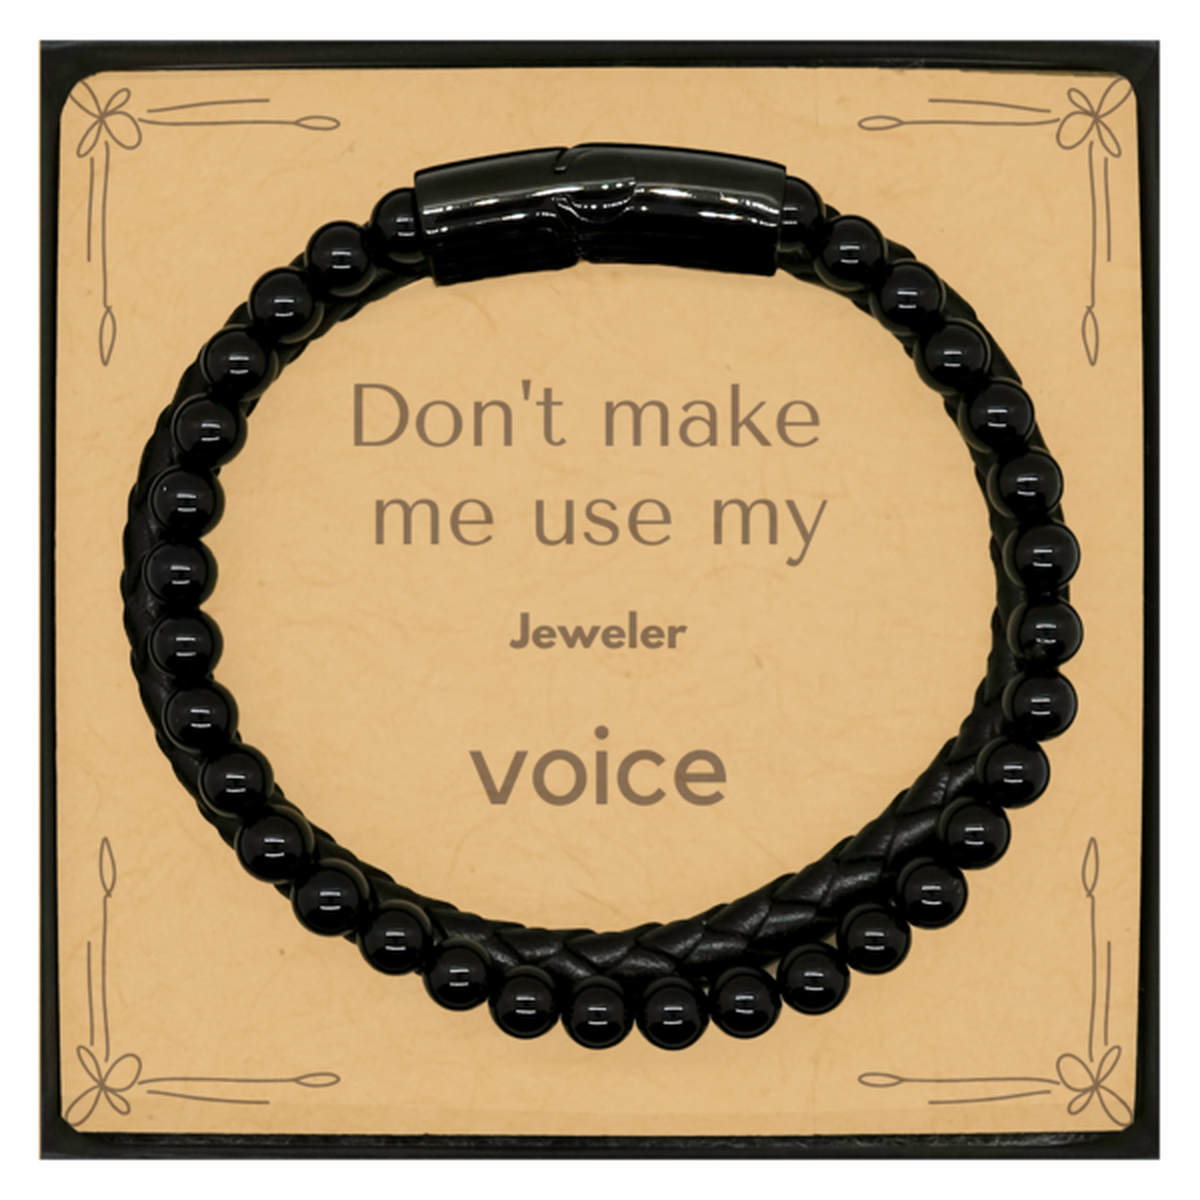 Don't make me use my Jeweler voice, Sarcasm Jeweler Card Gifts, Christmas Jeweler Stone Leather Bracelets Birthday Unique Gifts For Jeweler Coworkers, Men, Women, Colleague, Friends